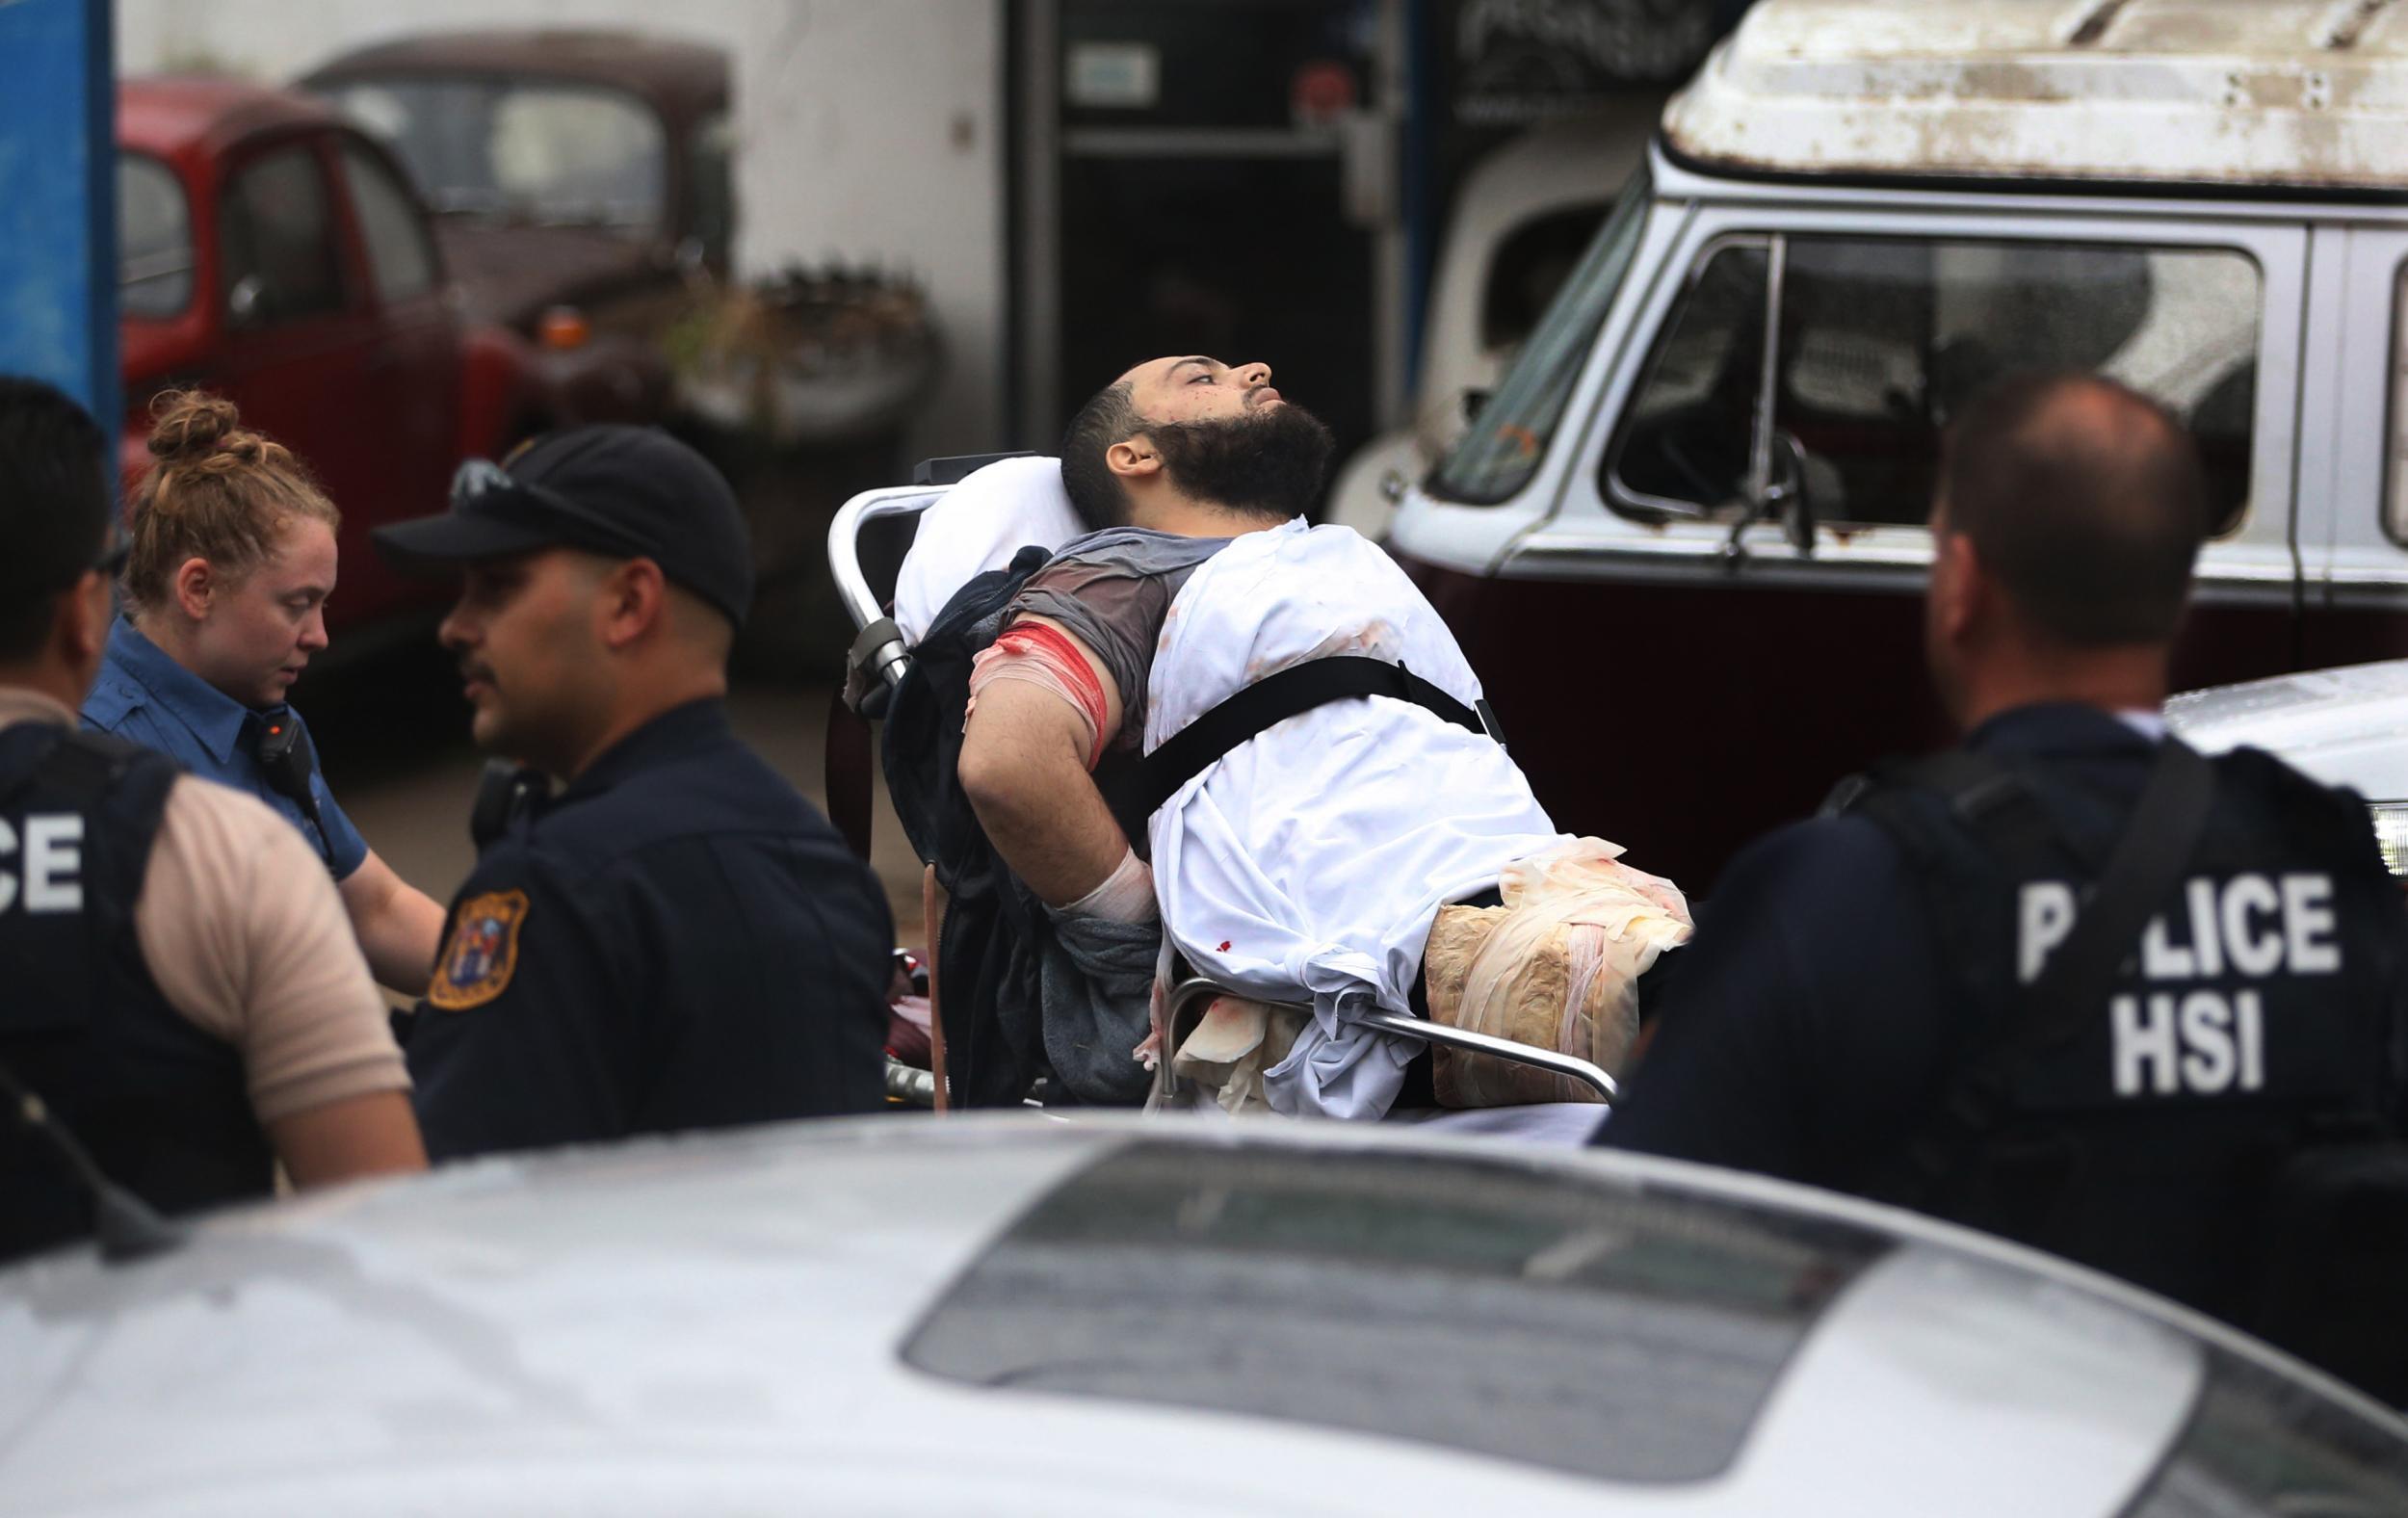 Ahmad Khan Rahami is taken into custody after a shootout with police Monday, Sept. 19, 2016, in Linden, New Jersey. Rahami was wanted for questioning in the bombings that rocked the Chelsea neighborhood of New York and the New Jersey shore town of Seaside Park.